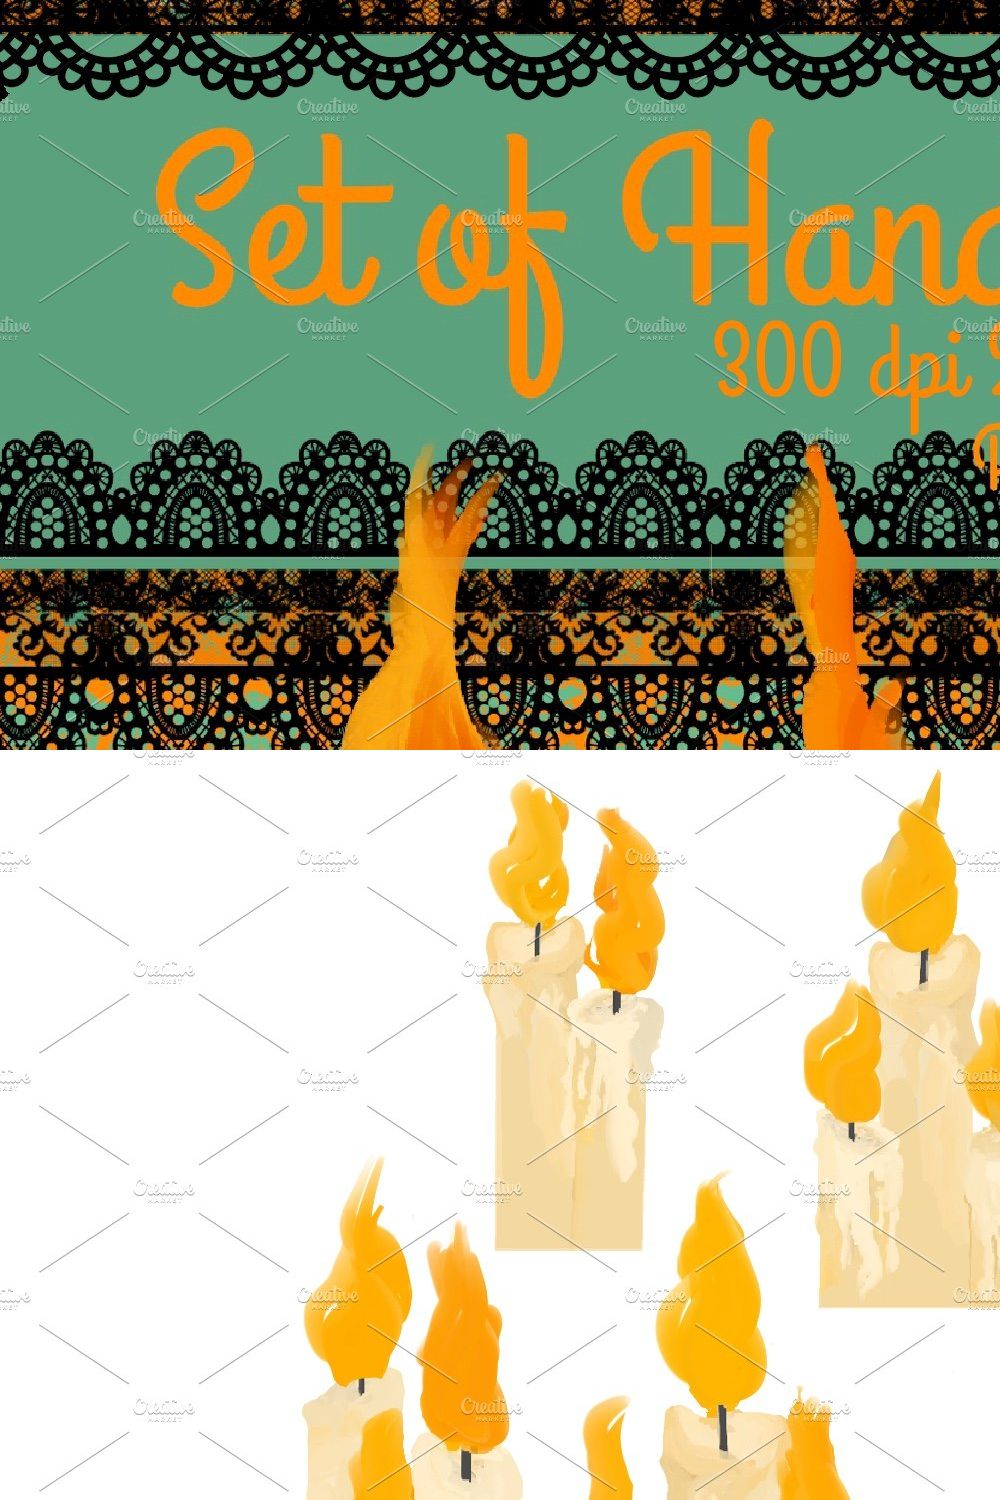 Set of hand drawn candles pinterest preview image.